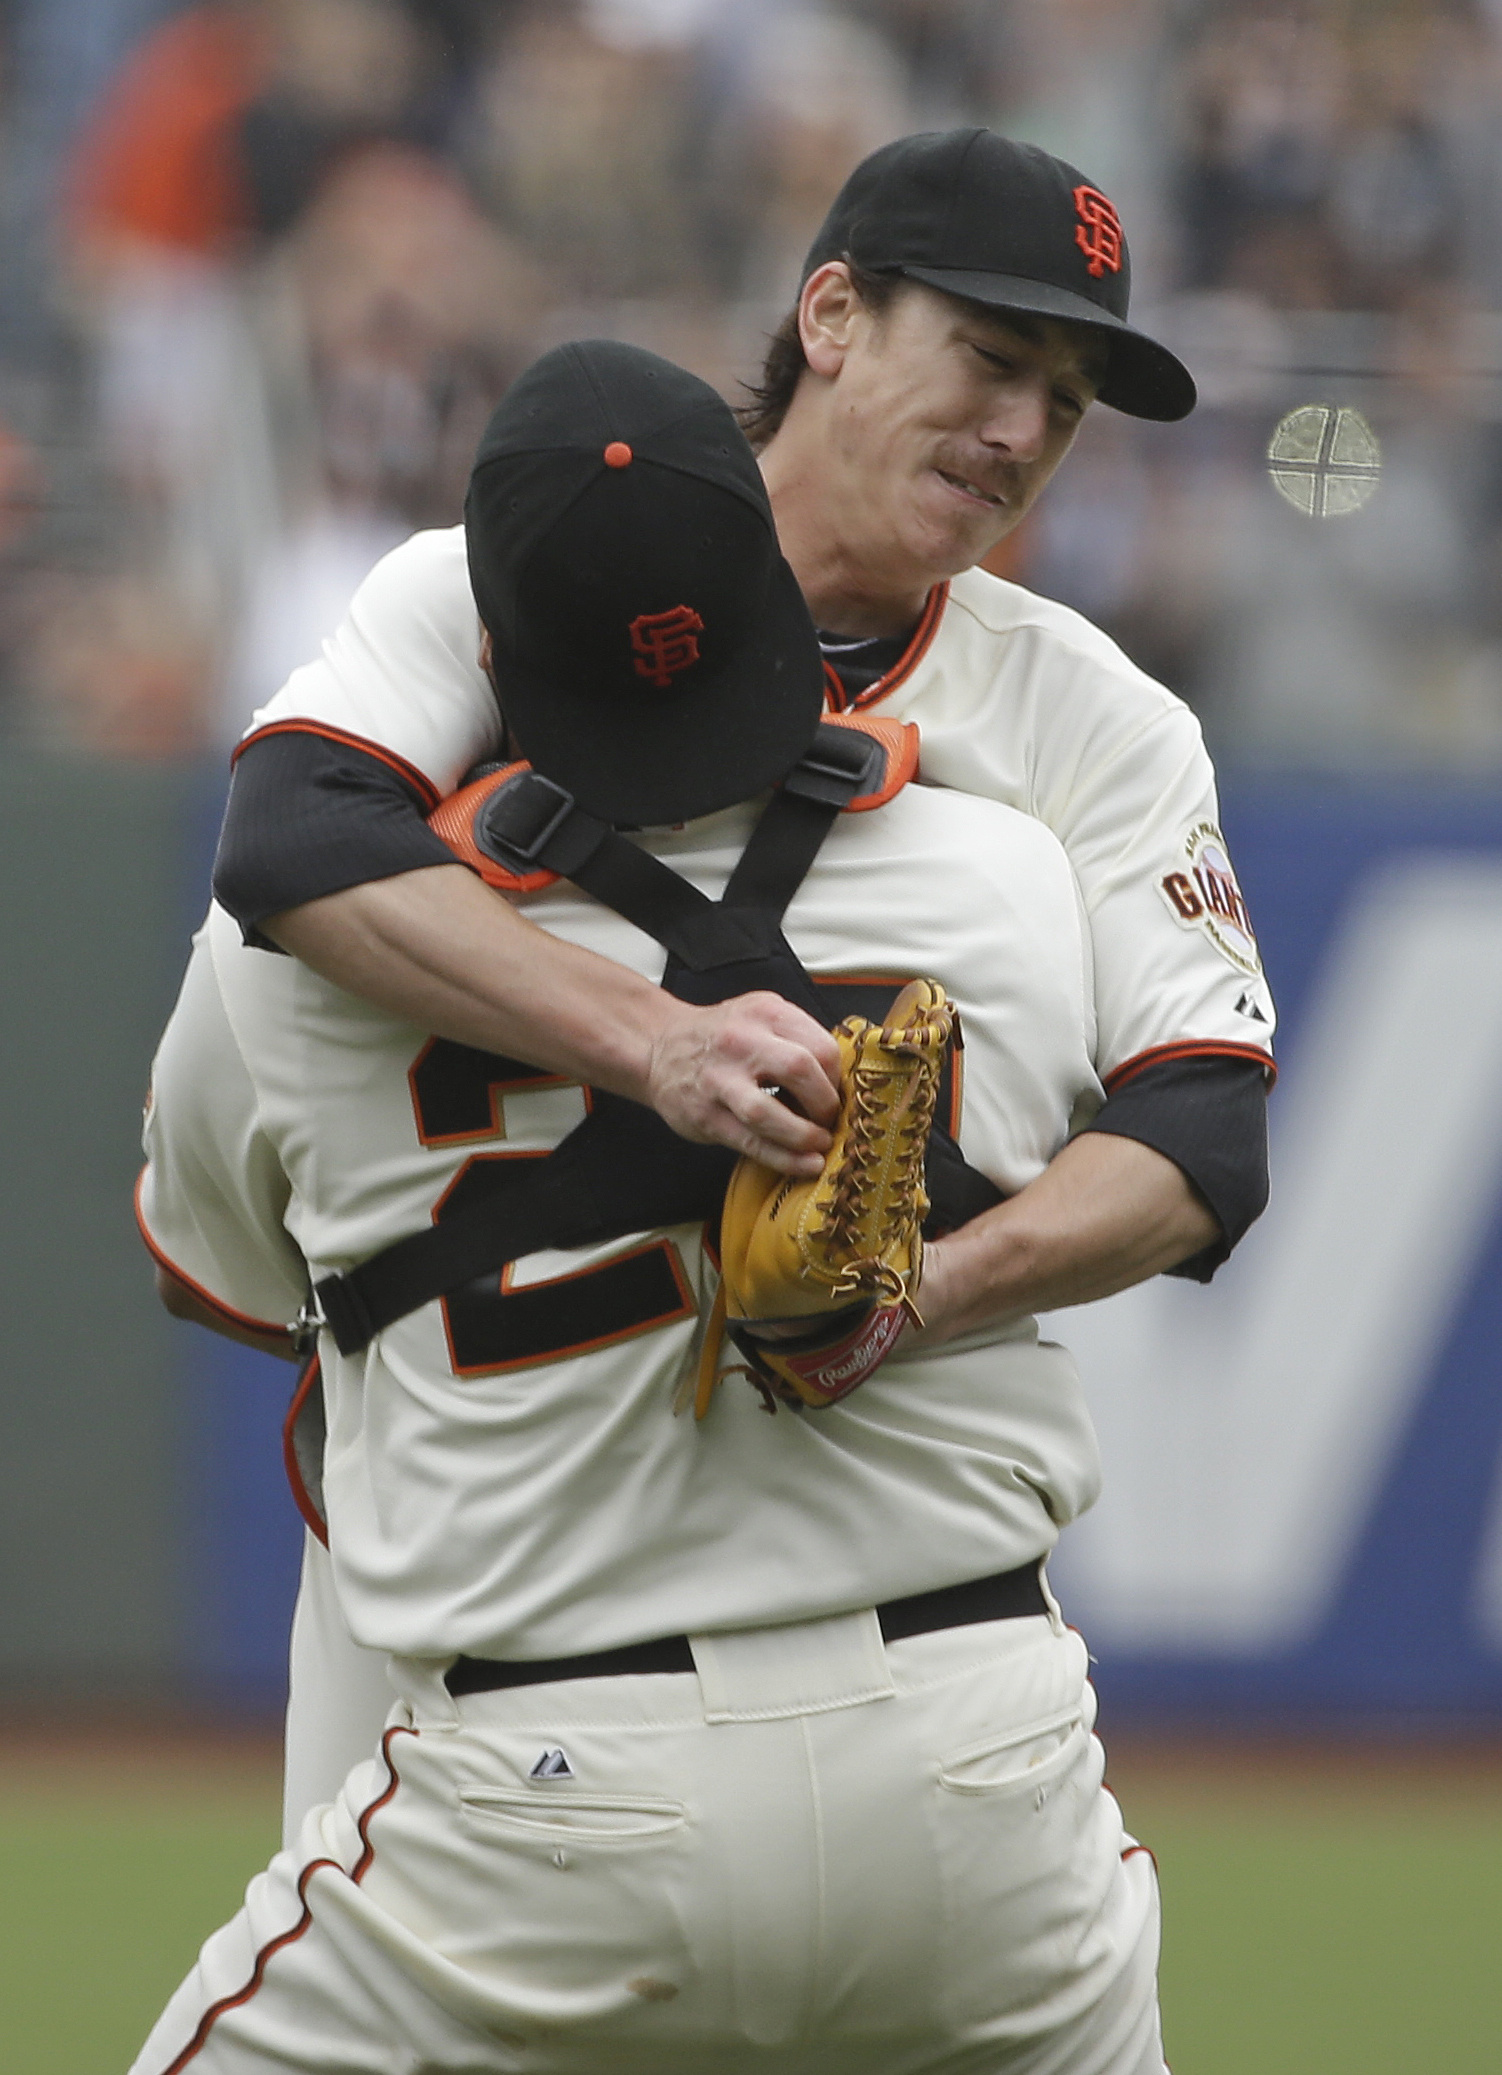 Giants: Remembering Tim Lincecum's two no-hitters